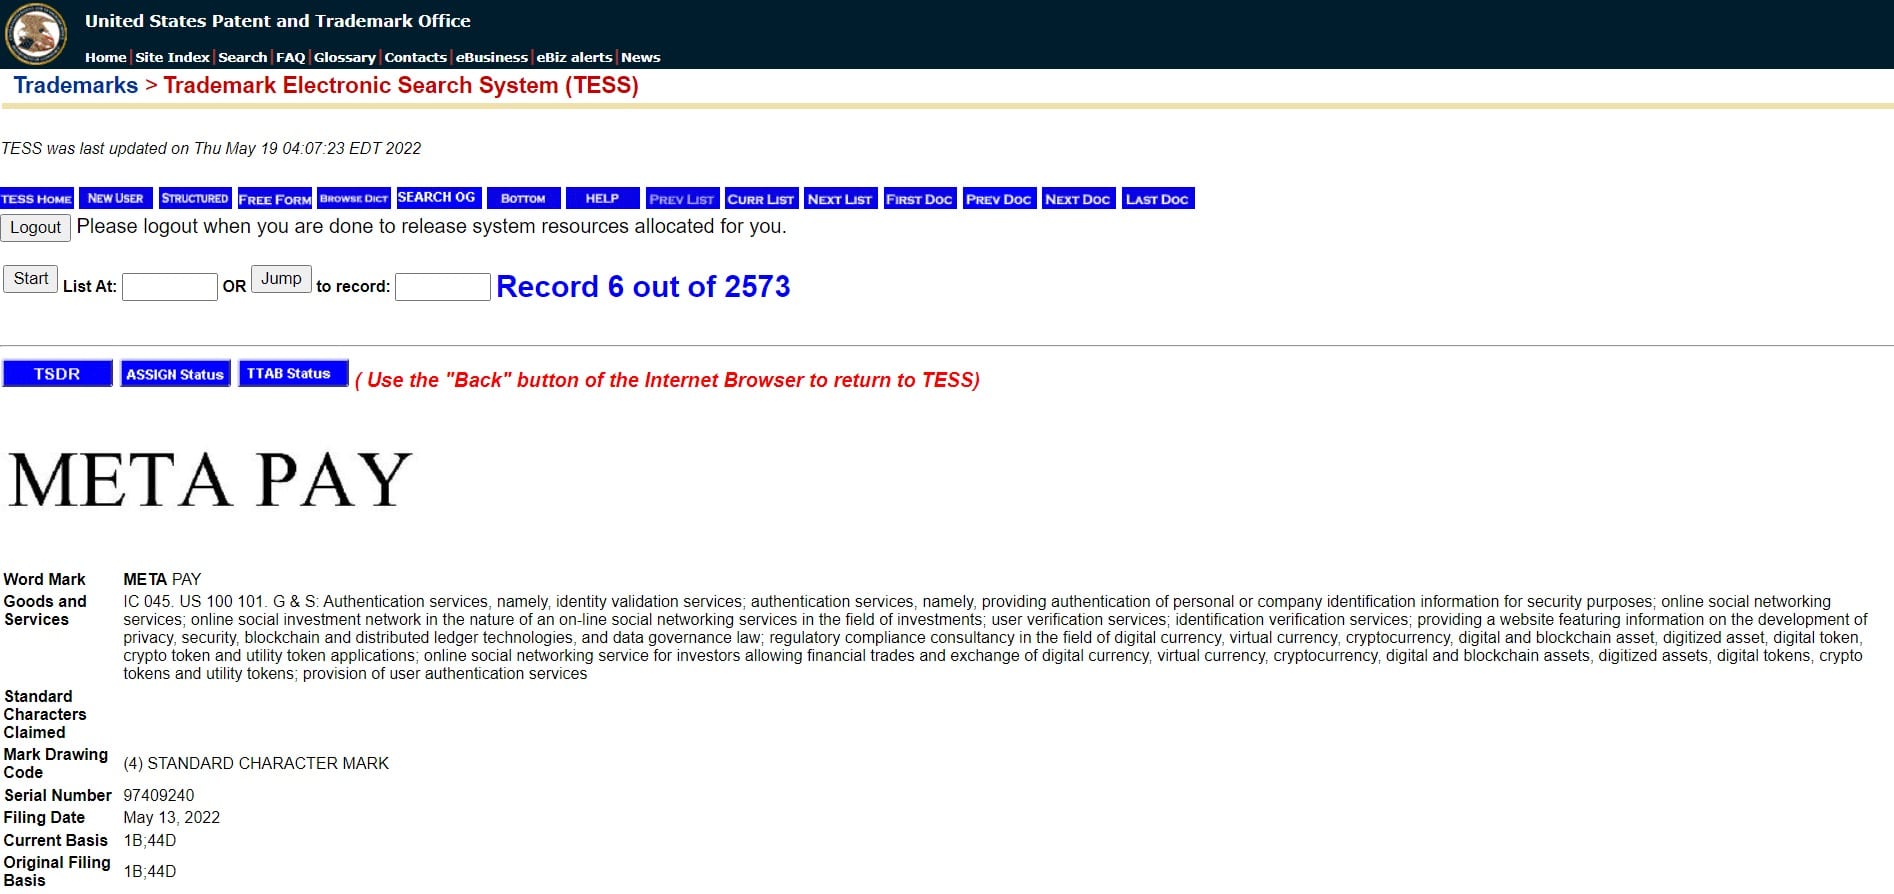 Meta's Meta Pay trademark registration on the United States Patent and Trademark Office website